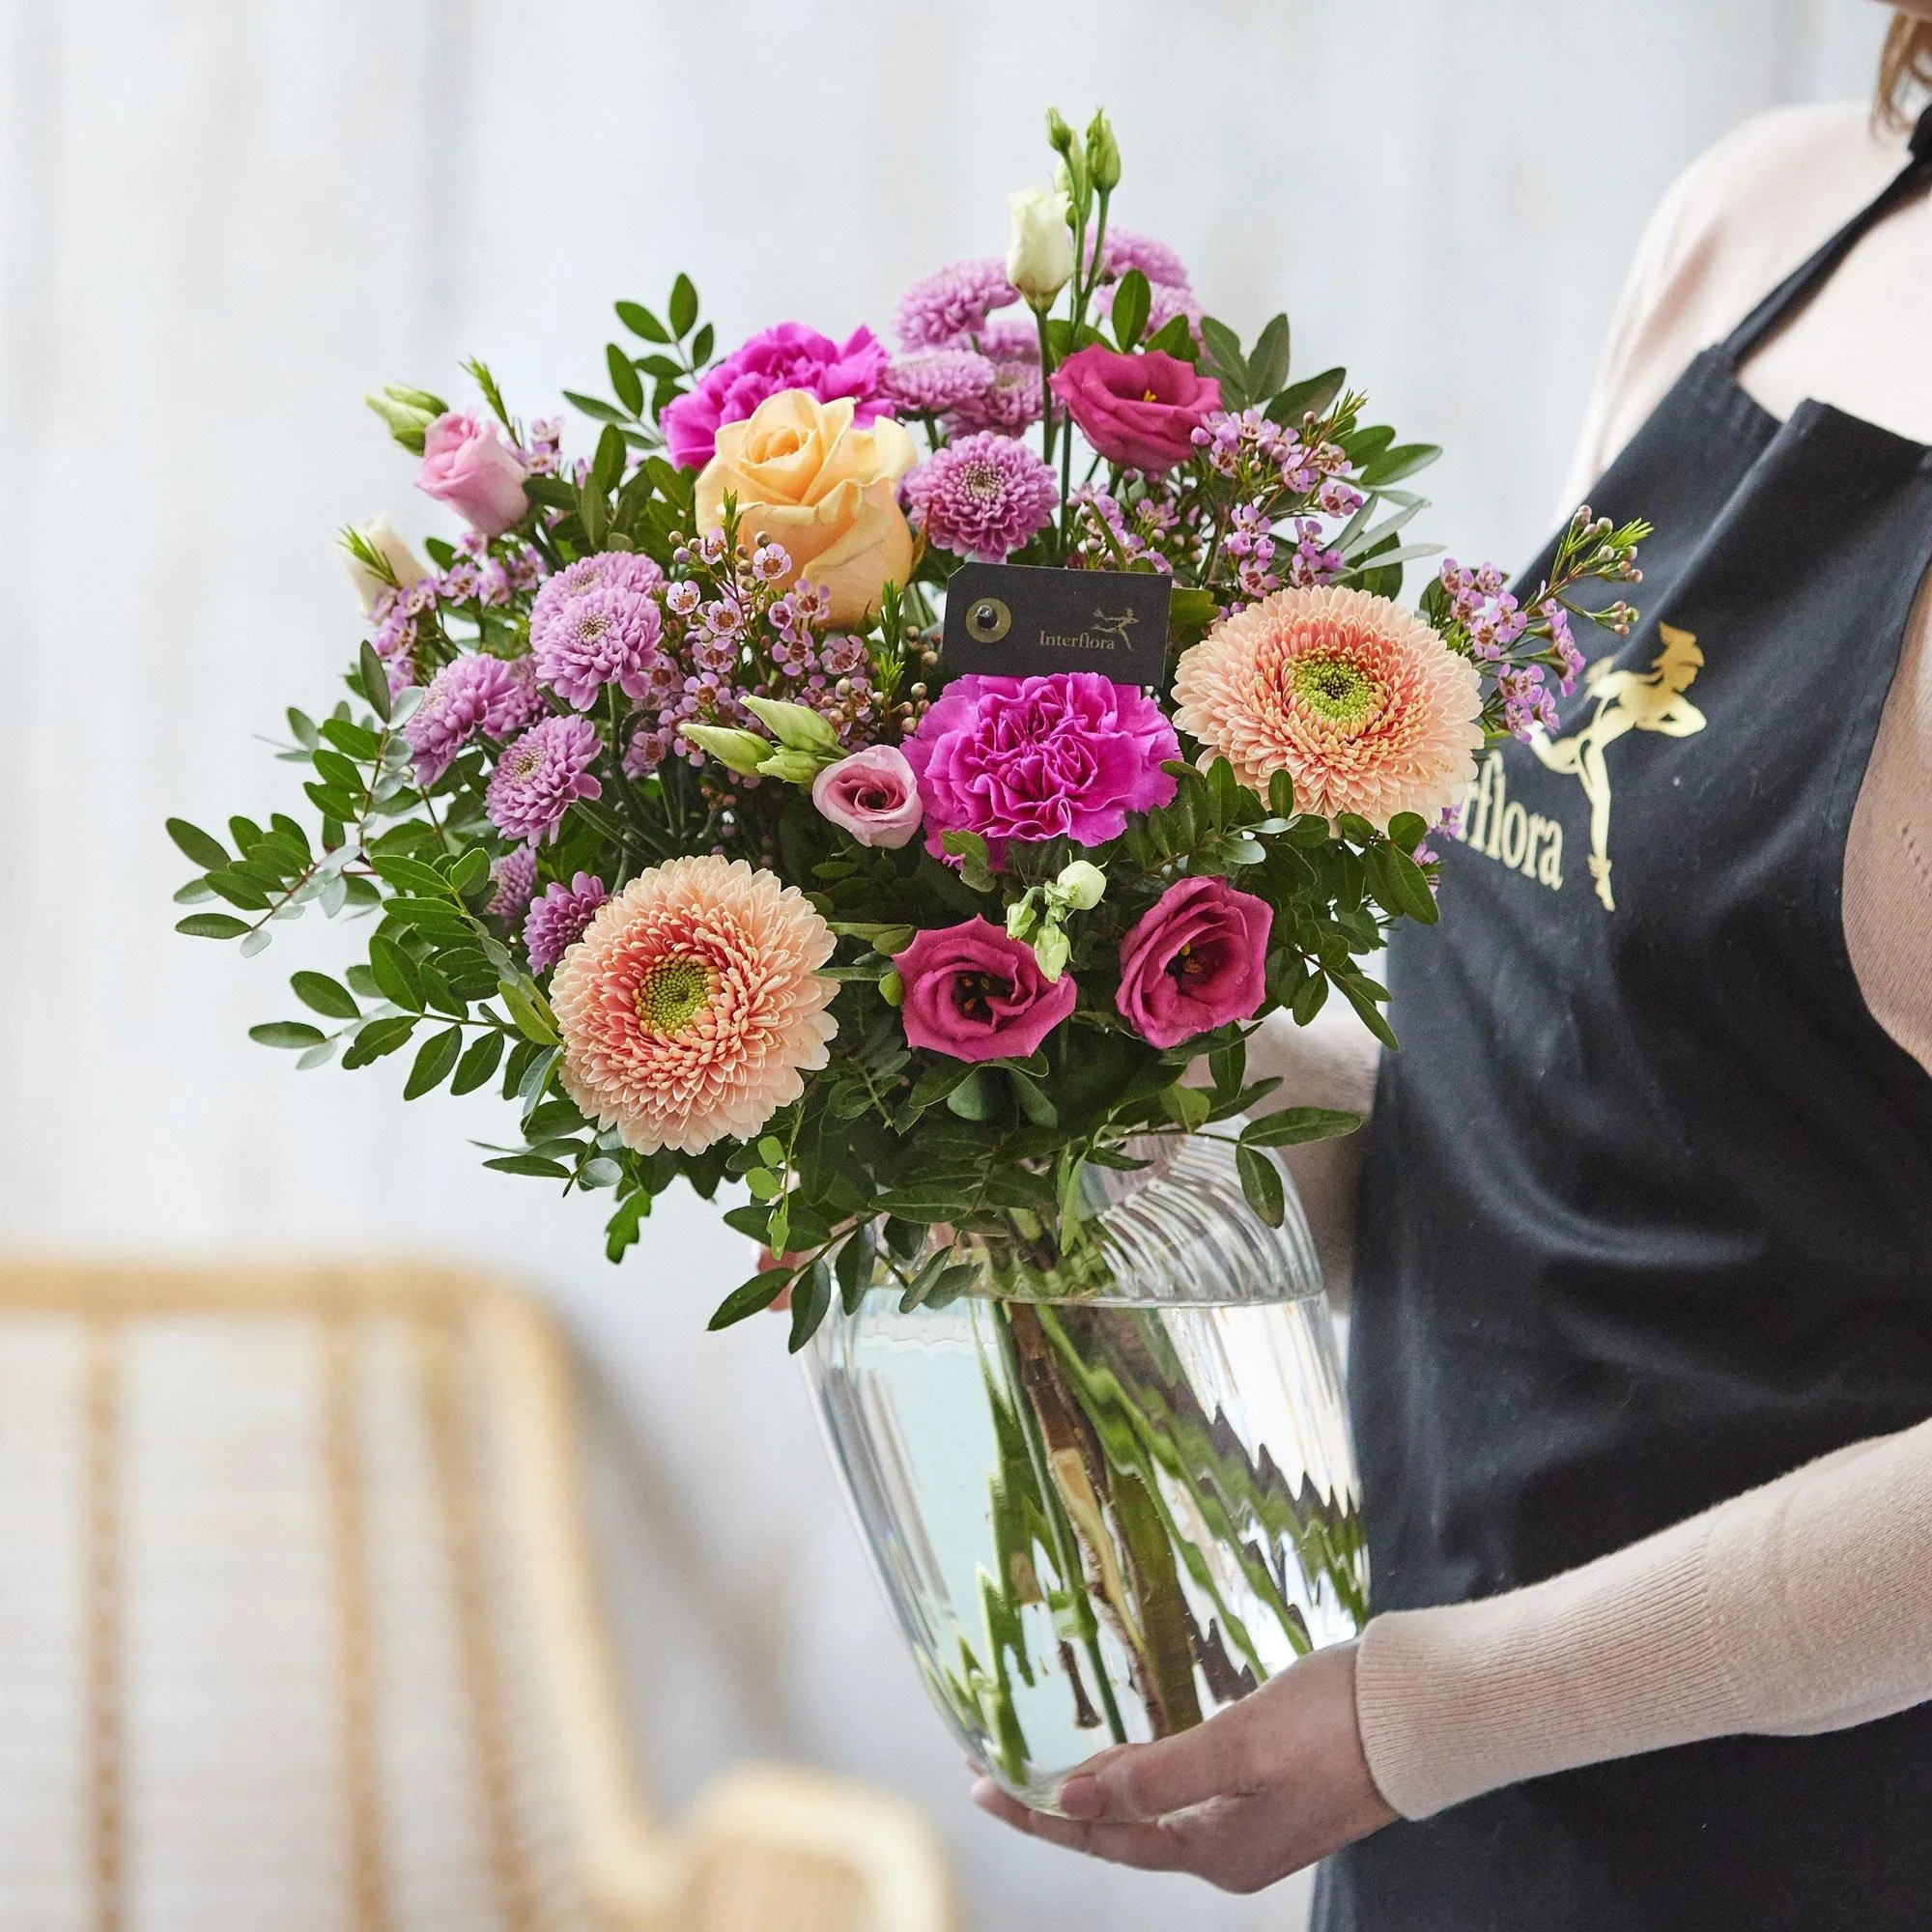 Handcrafted Bouquet in a Vase - Ireland